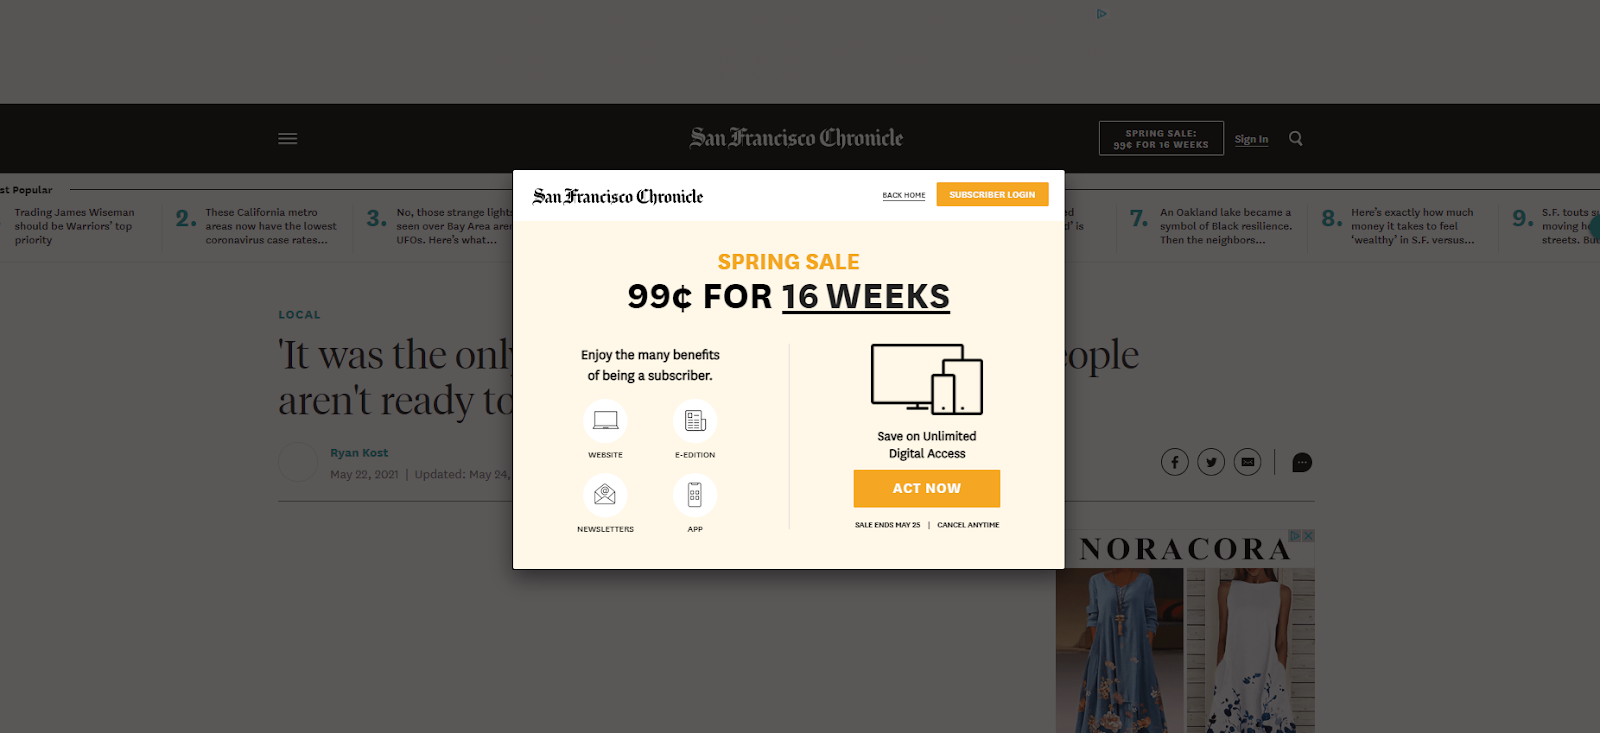 San Francisco Chronicles splash page is a small square requiring readers to sign in or sign up before they can get to the article itself